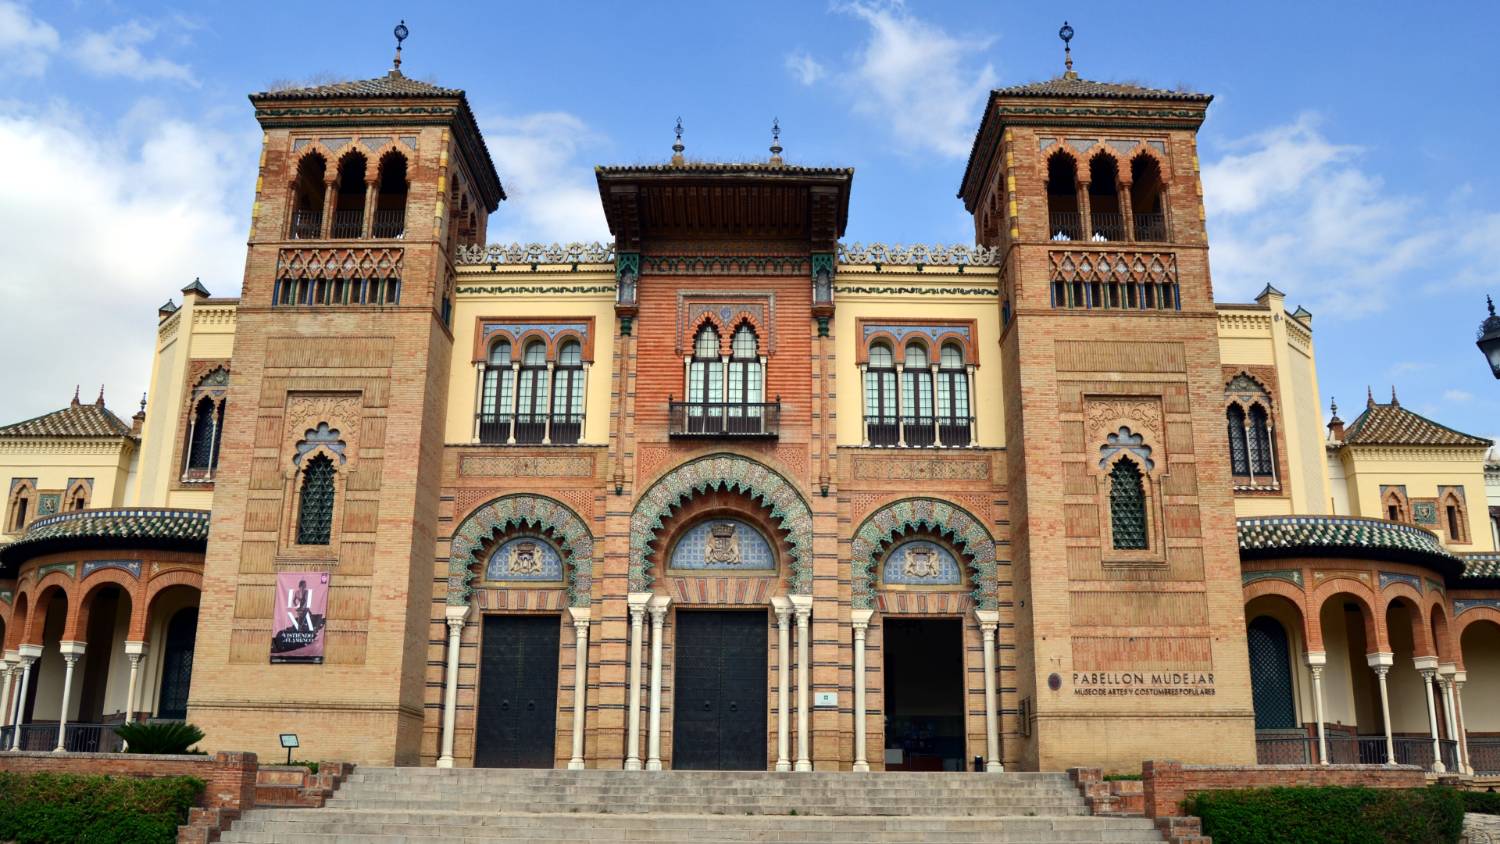 Seville's Museum of Popular Arts and Traditions is built following the mudejar architectural style (Emilio J. Rodríguez Posada)